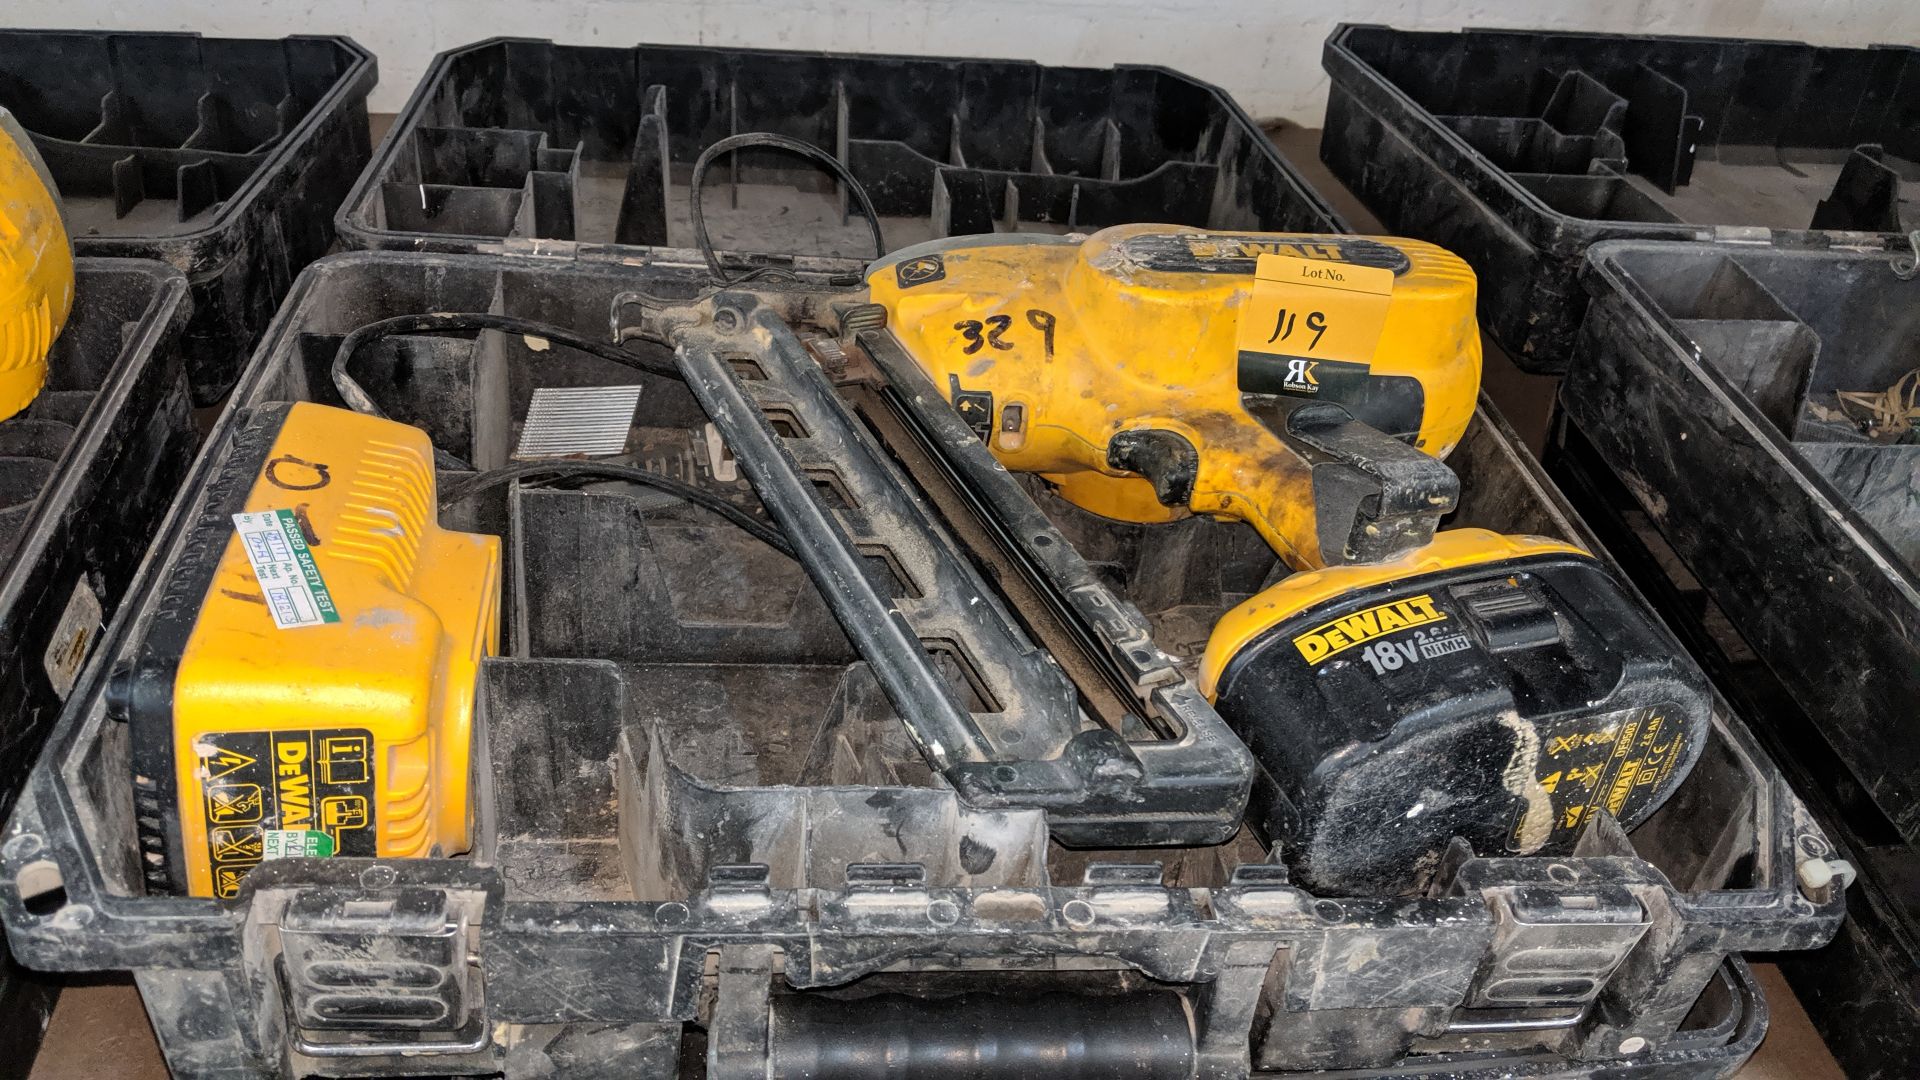 DeWalt cordless nail gun model DC618, including 1 off battery, 1 off charger & 1 off carry case